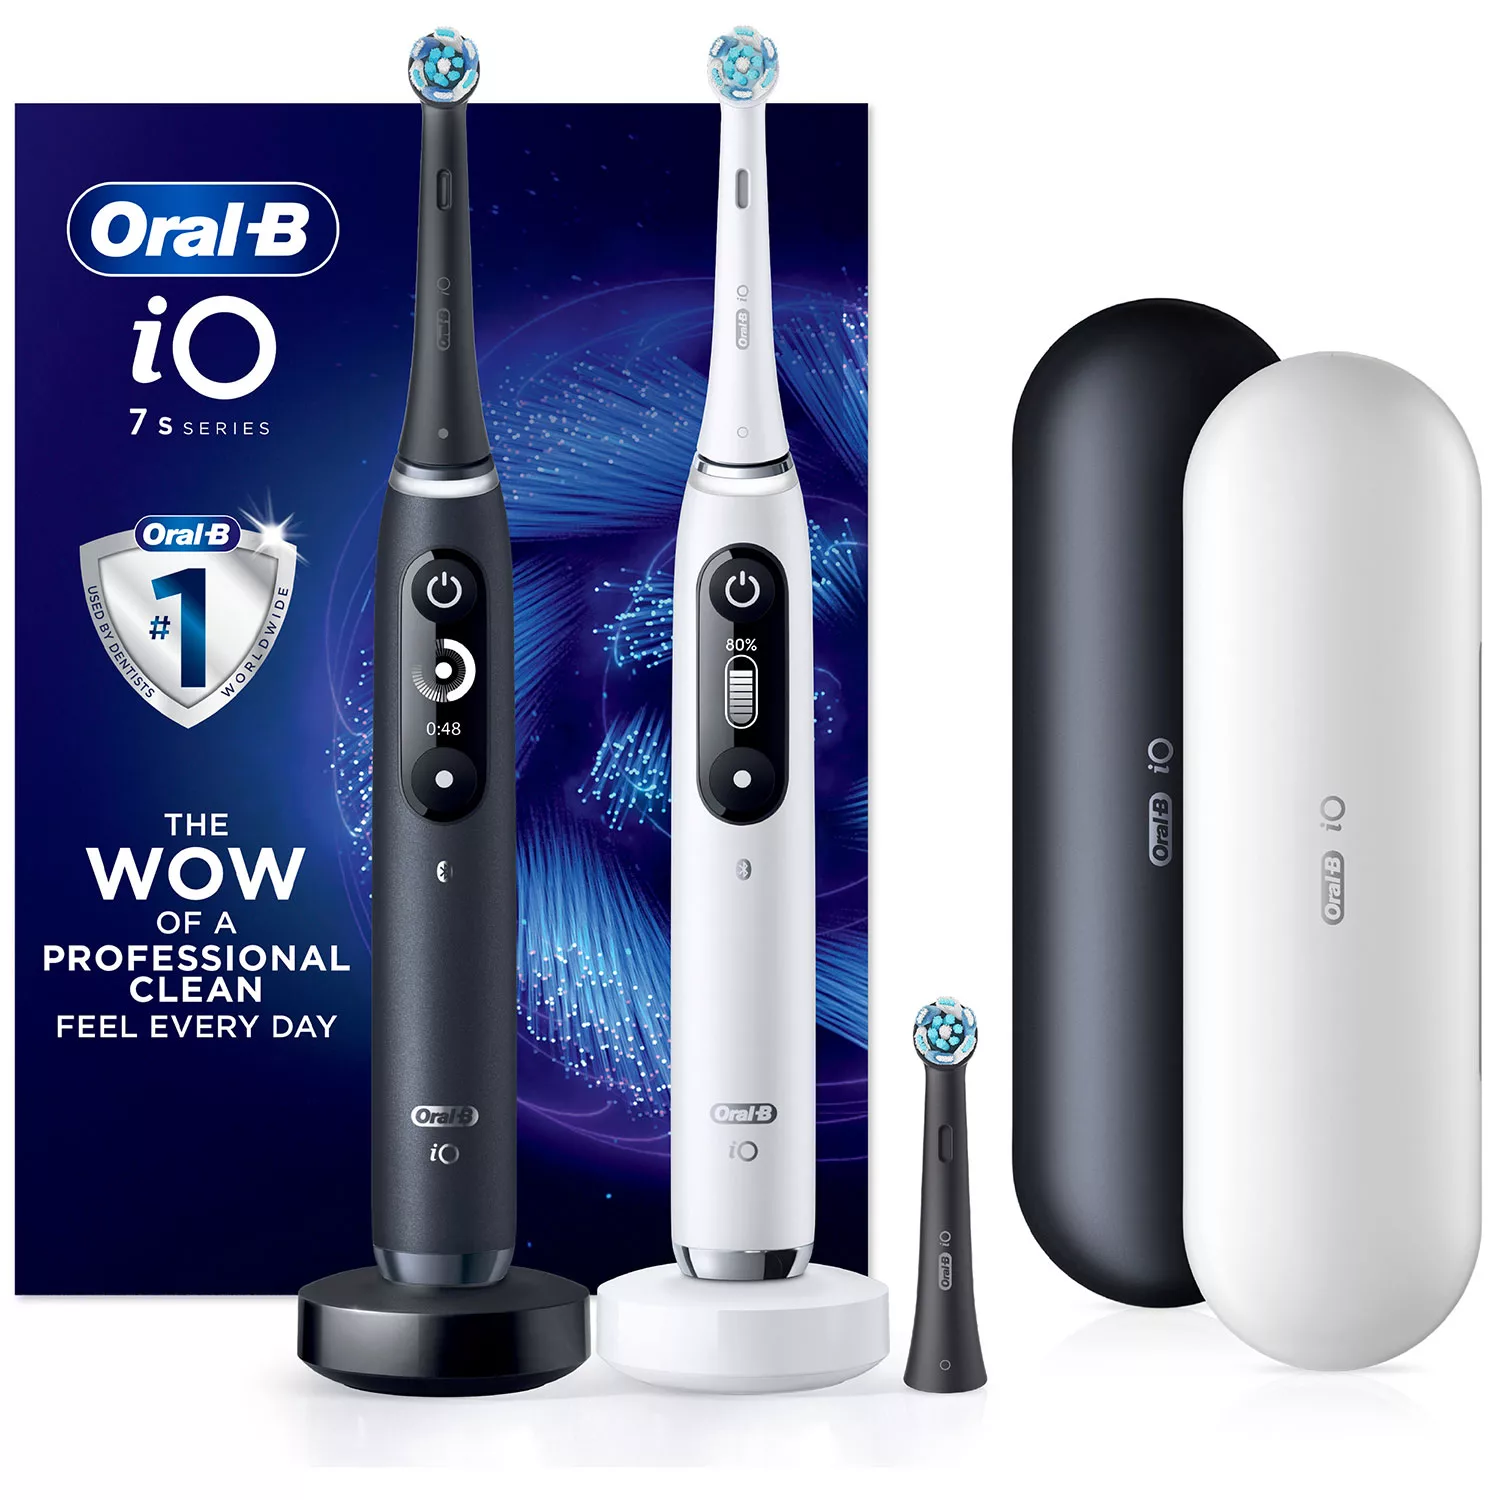 Oral-B iO Series 7s Electric Toothbrush Black Onyx and White Alabaster (2 pk.)